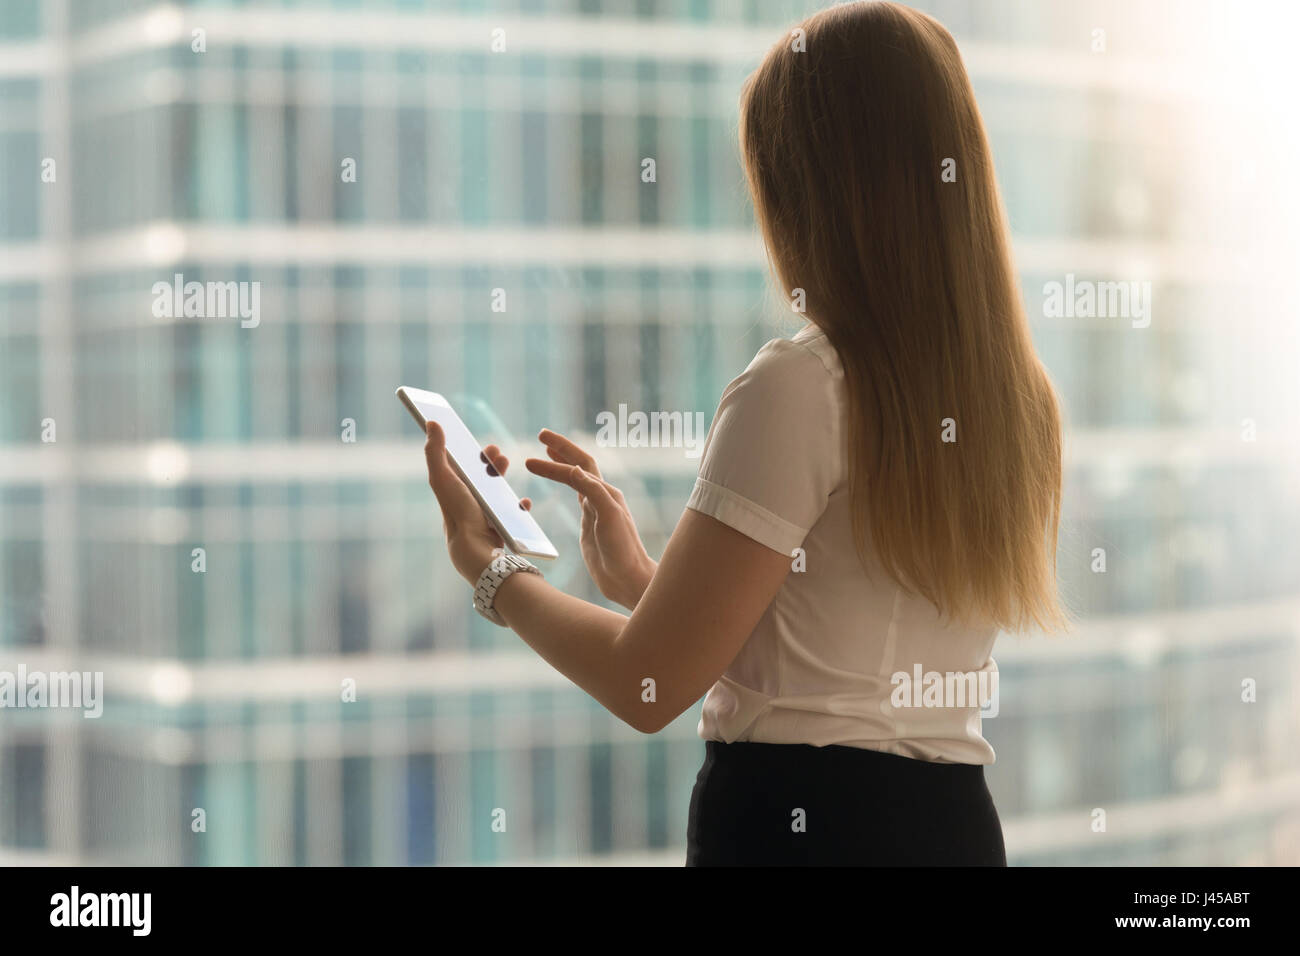 Woman back view swipe with finger on tablet screen Stock Photo